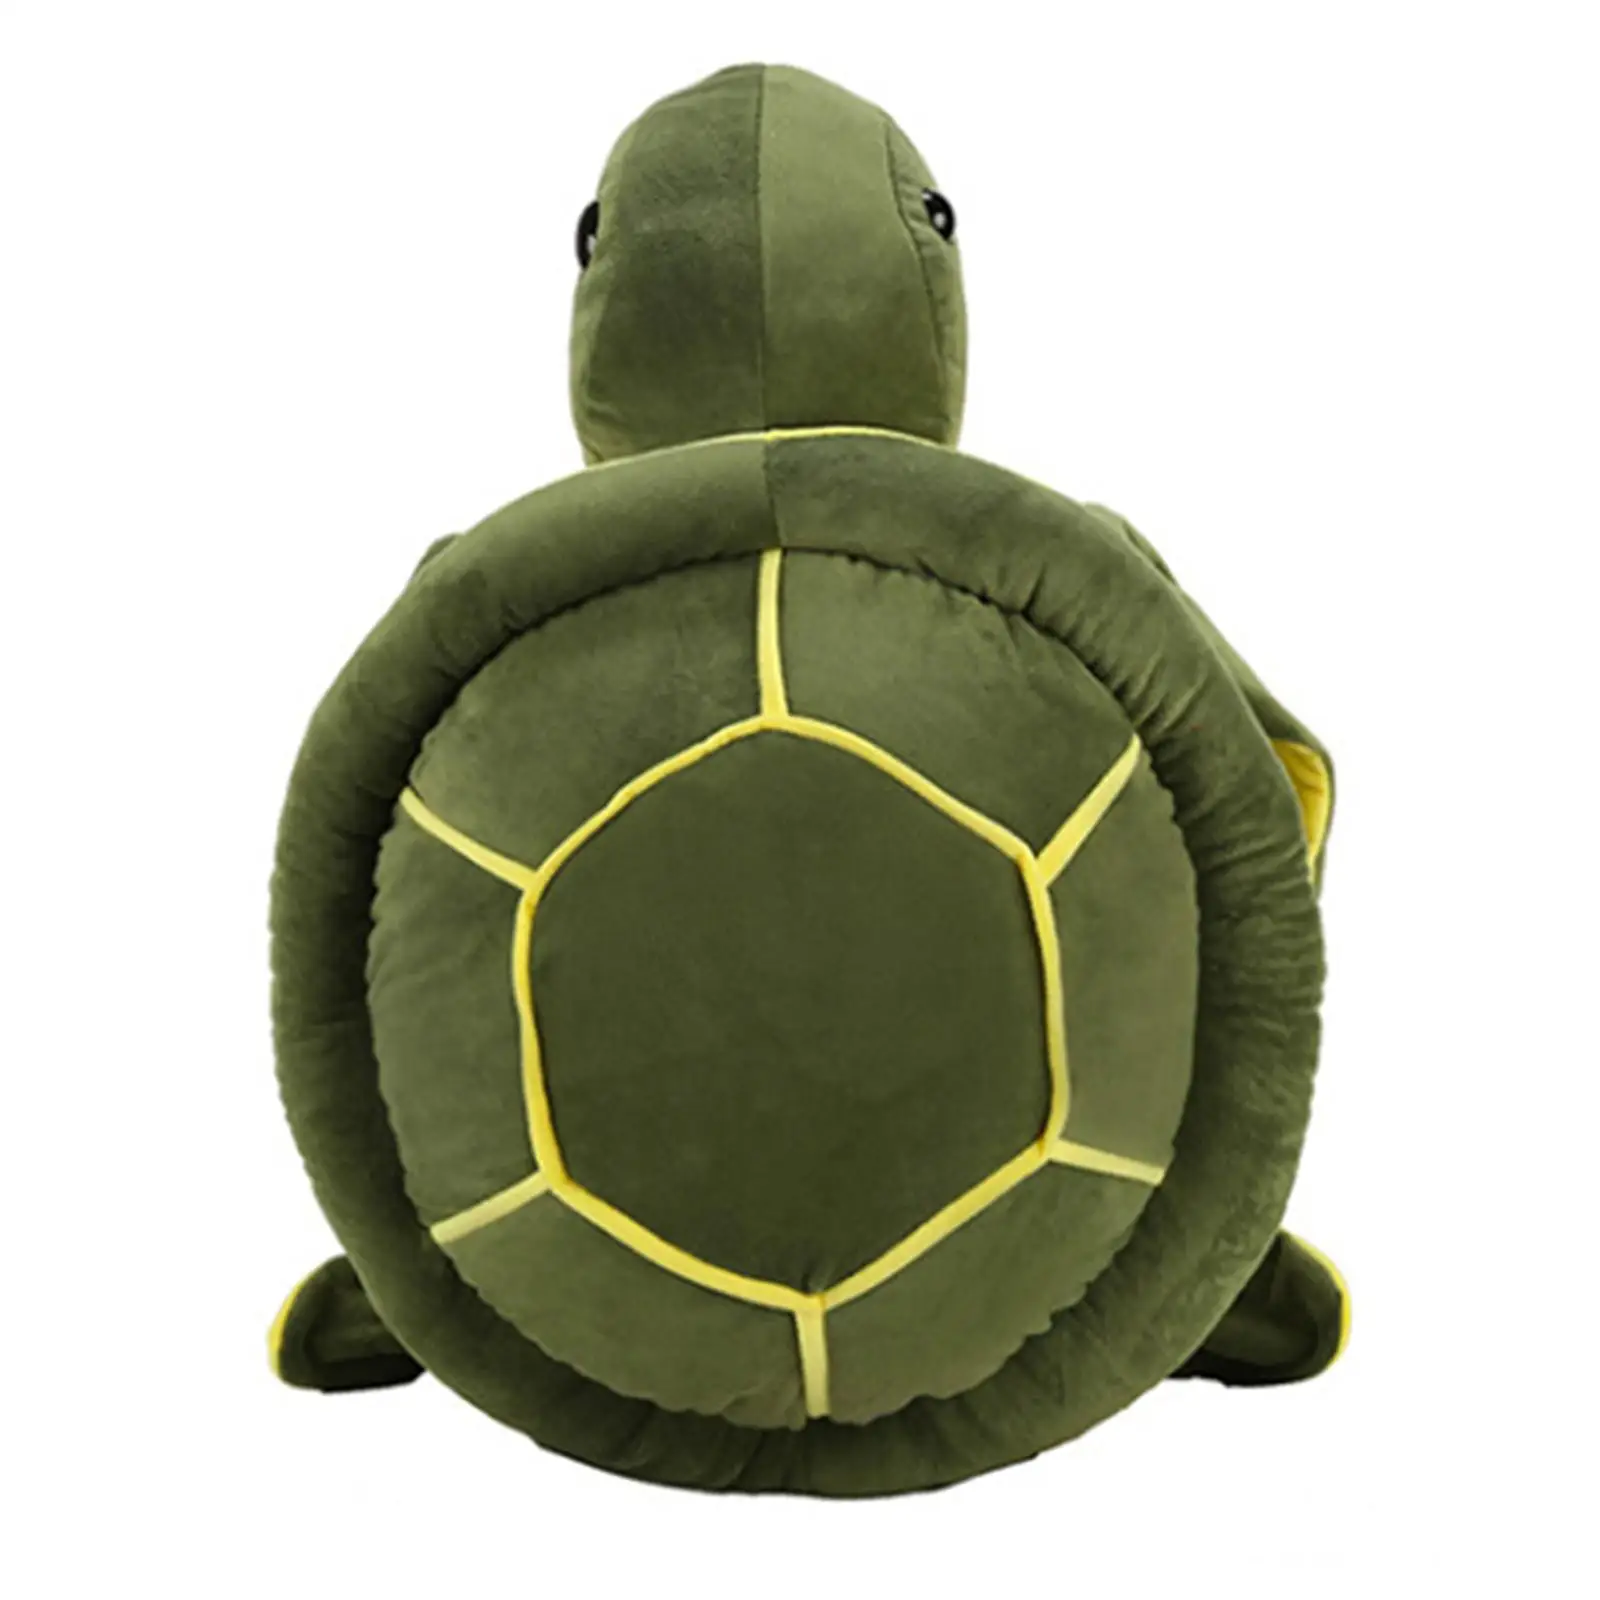 Plush Skiing Protector Gear Turtle Shape Protection Snowboarding Activities